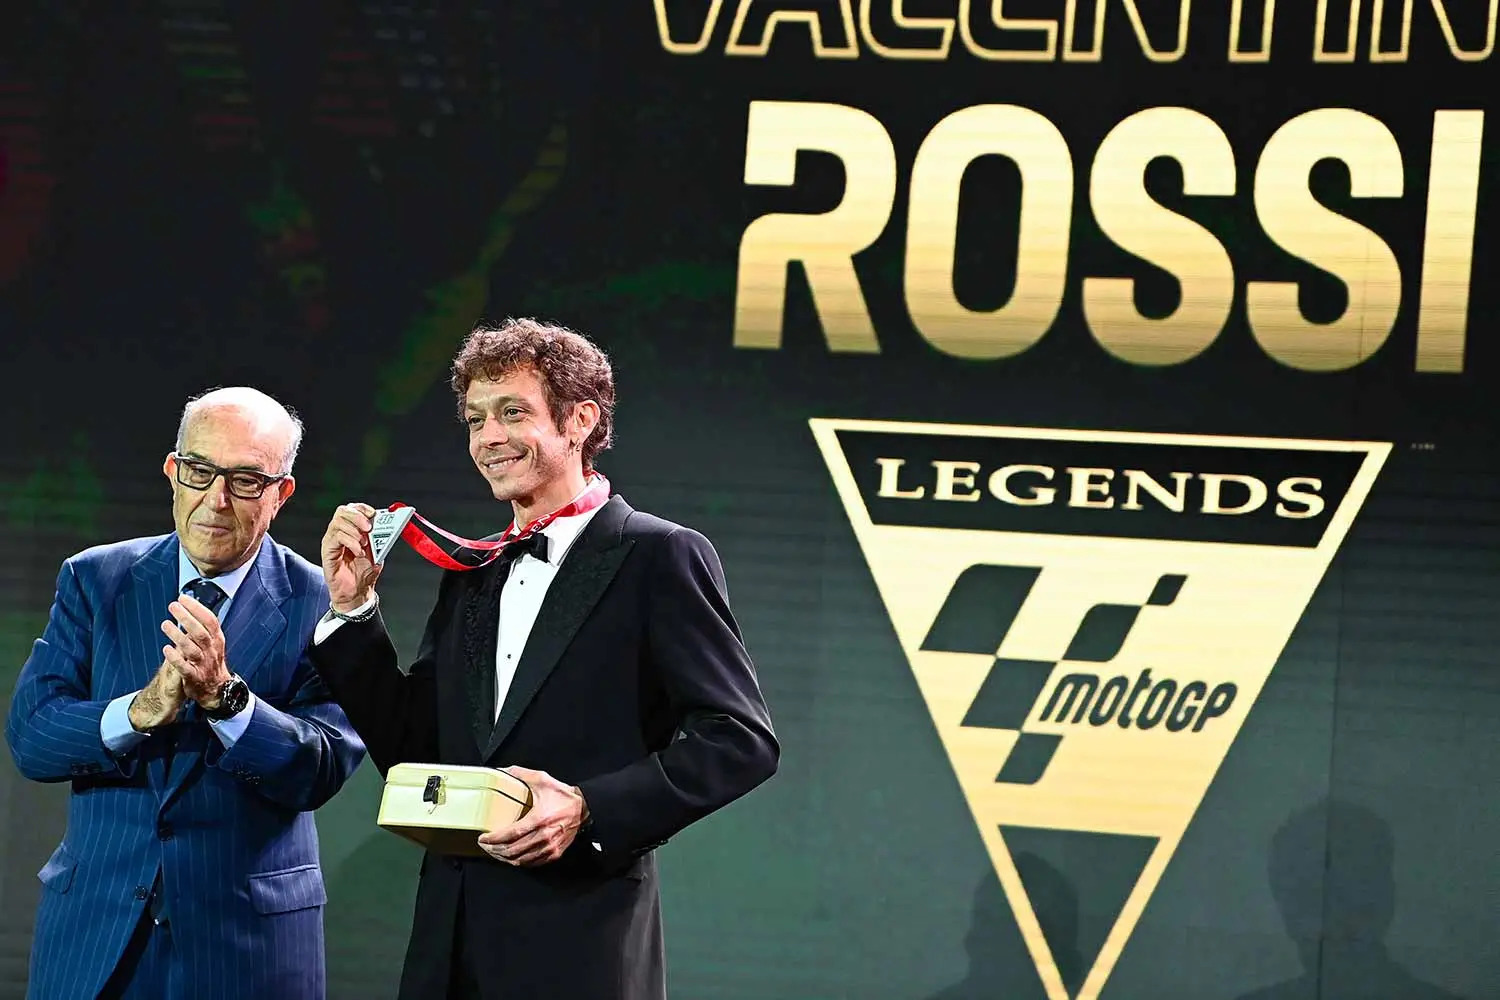 A view of Valentino Rossi as he is inducted into the Hall of Fame